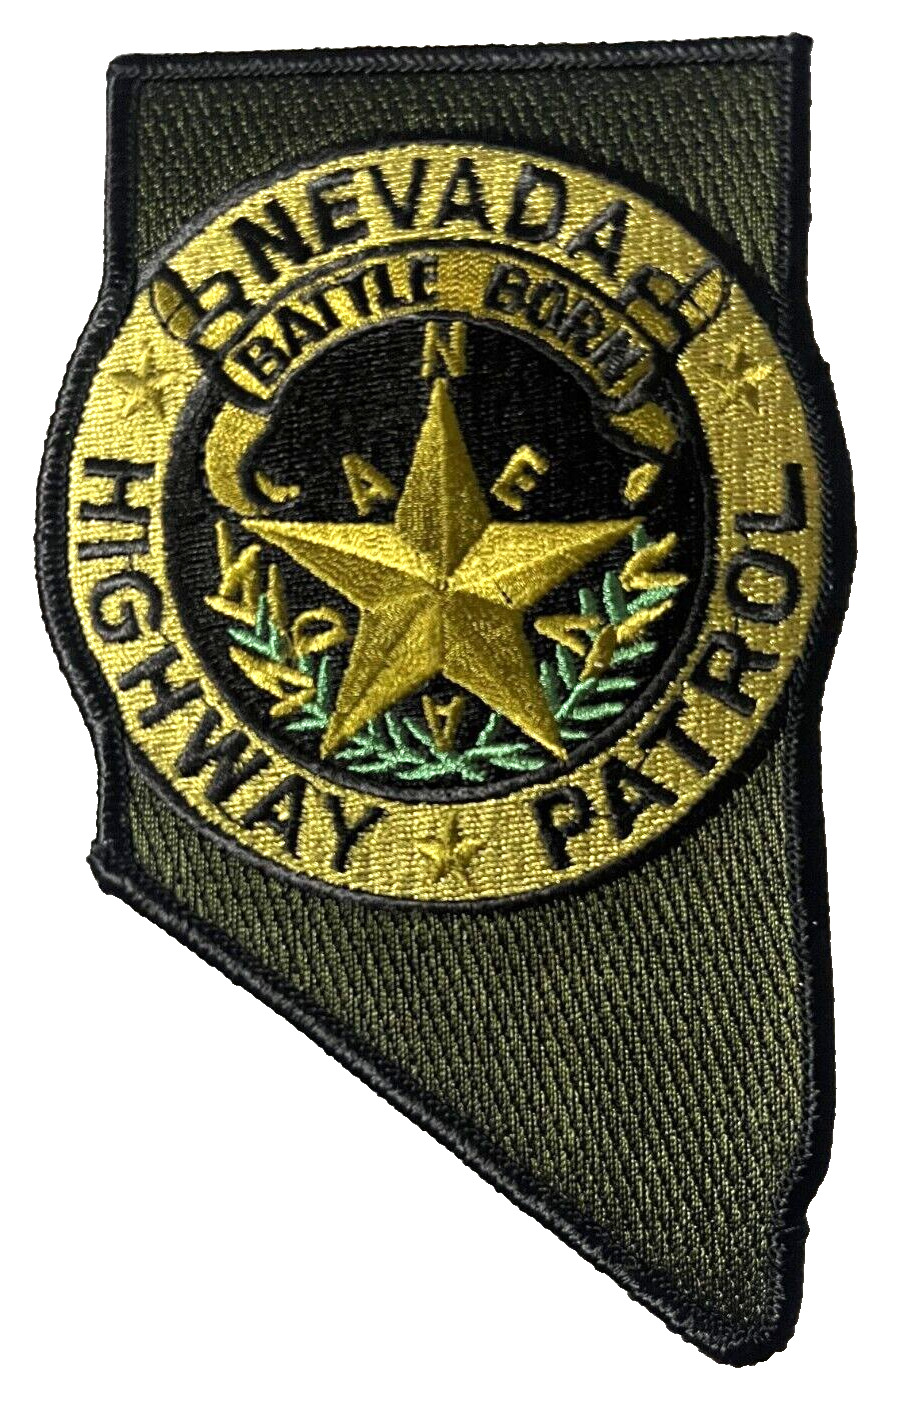 NEVADA HIGHWAY PATROL GRN SUBDUED PATCH (PD12) POLICE TACTICAL SHOULDER INSIGNIA